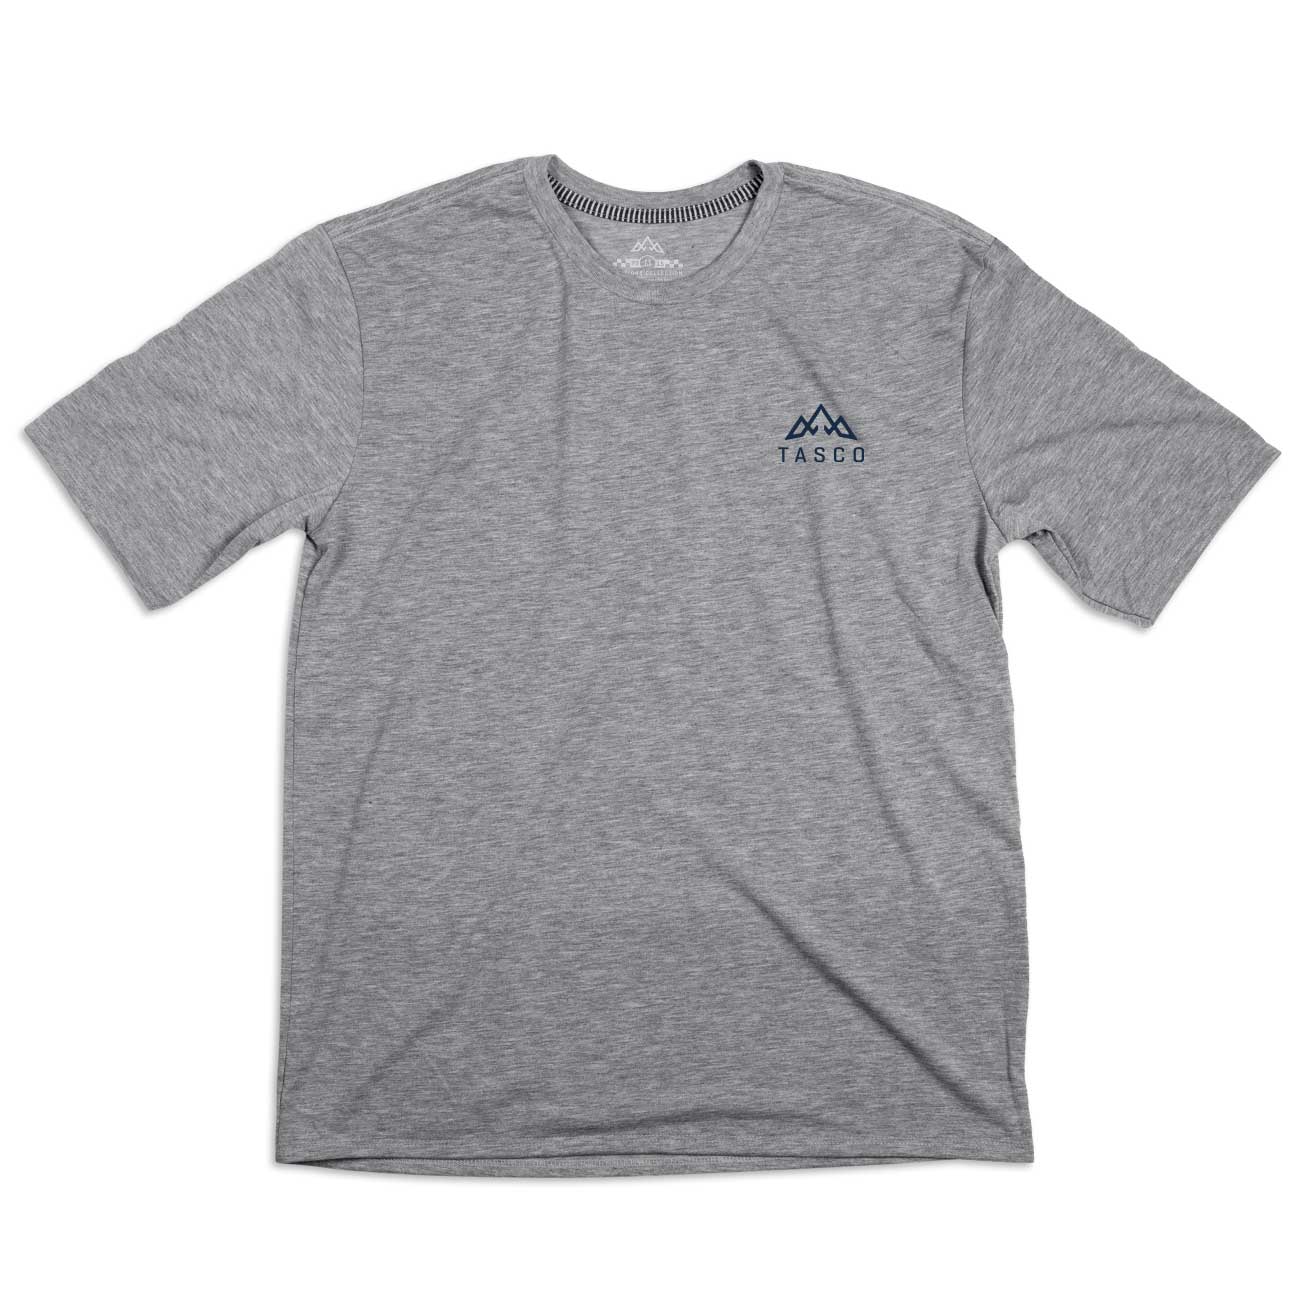 Sessions drirelease® Ride Jersey - Standard (Heather Gray)